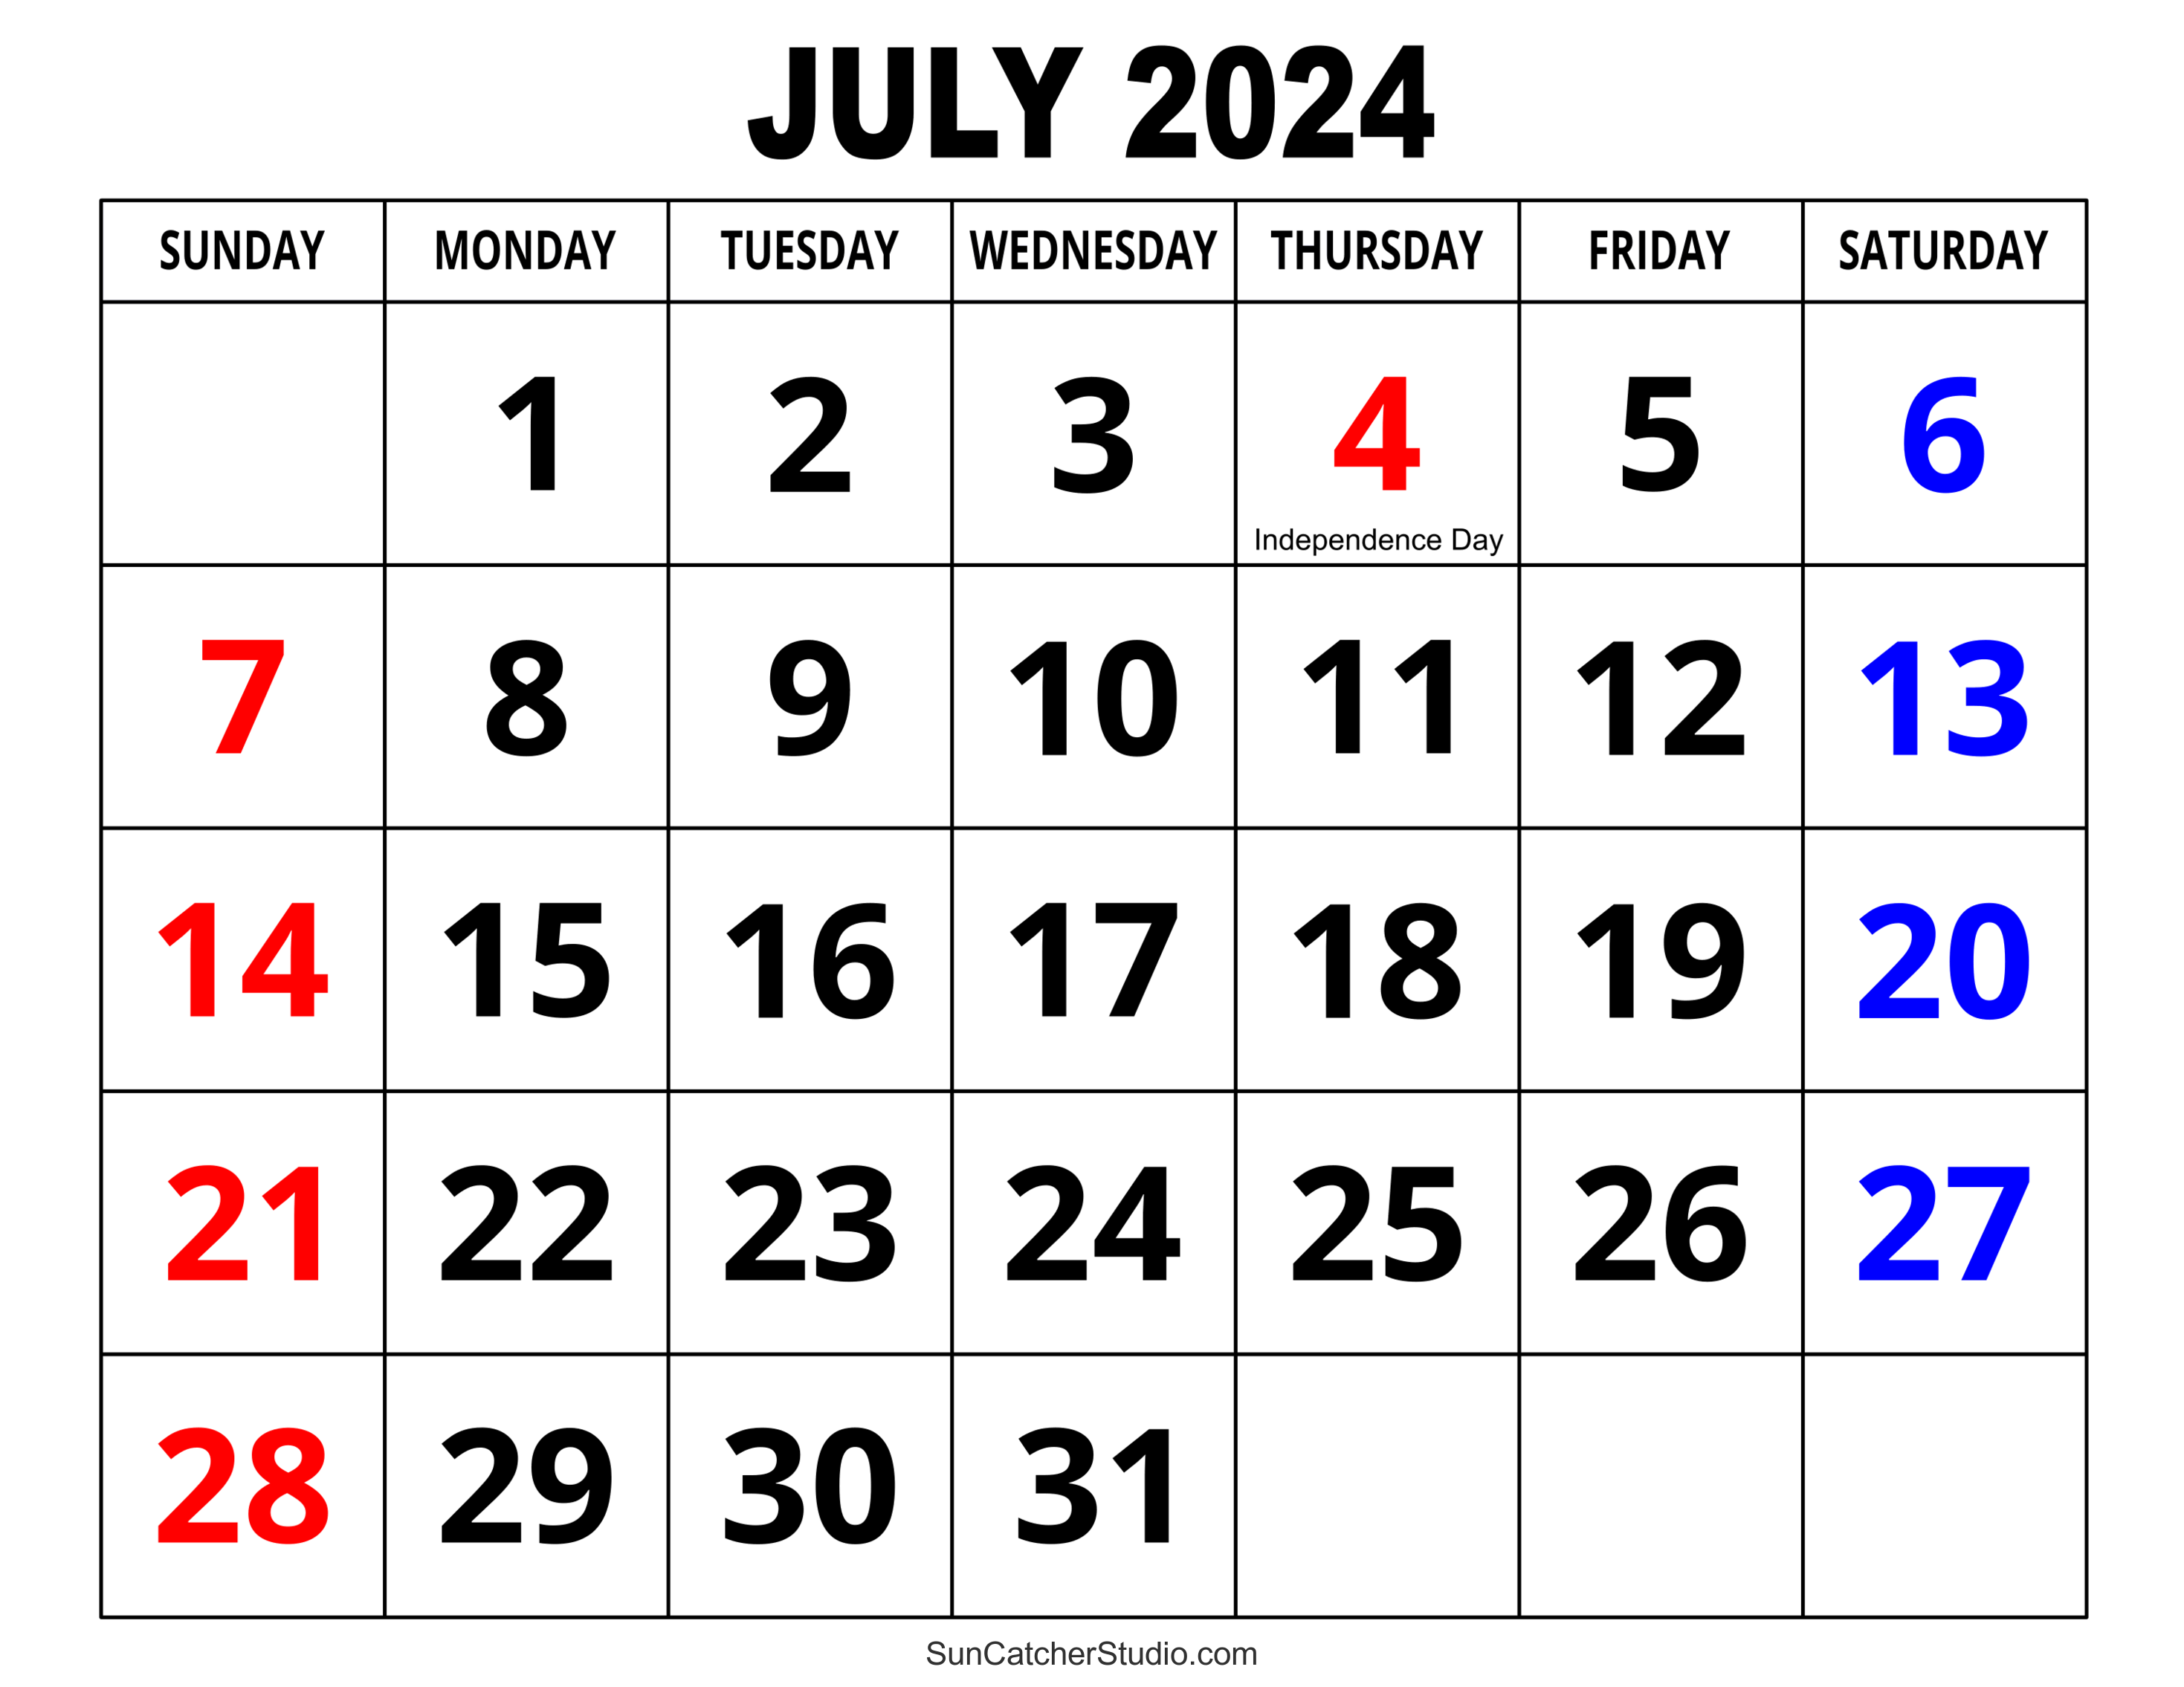 July 2024 Calendar (Free Printable) – Diy Projects, Patterns pertaining to 8 July 2024 Calendar Printable